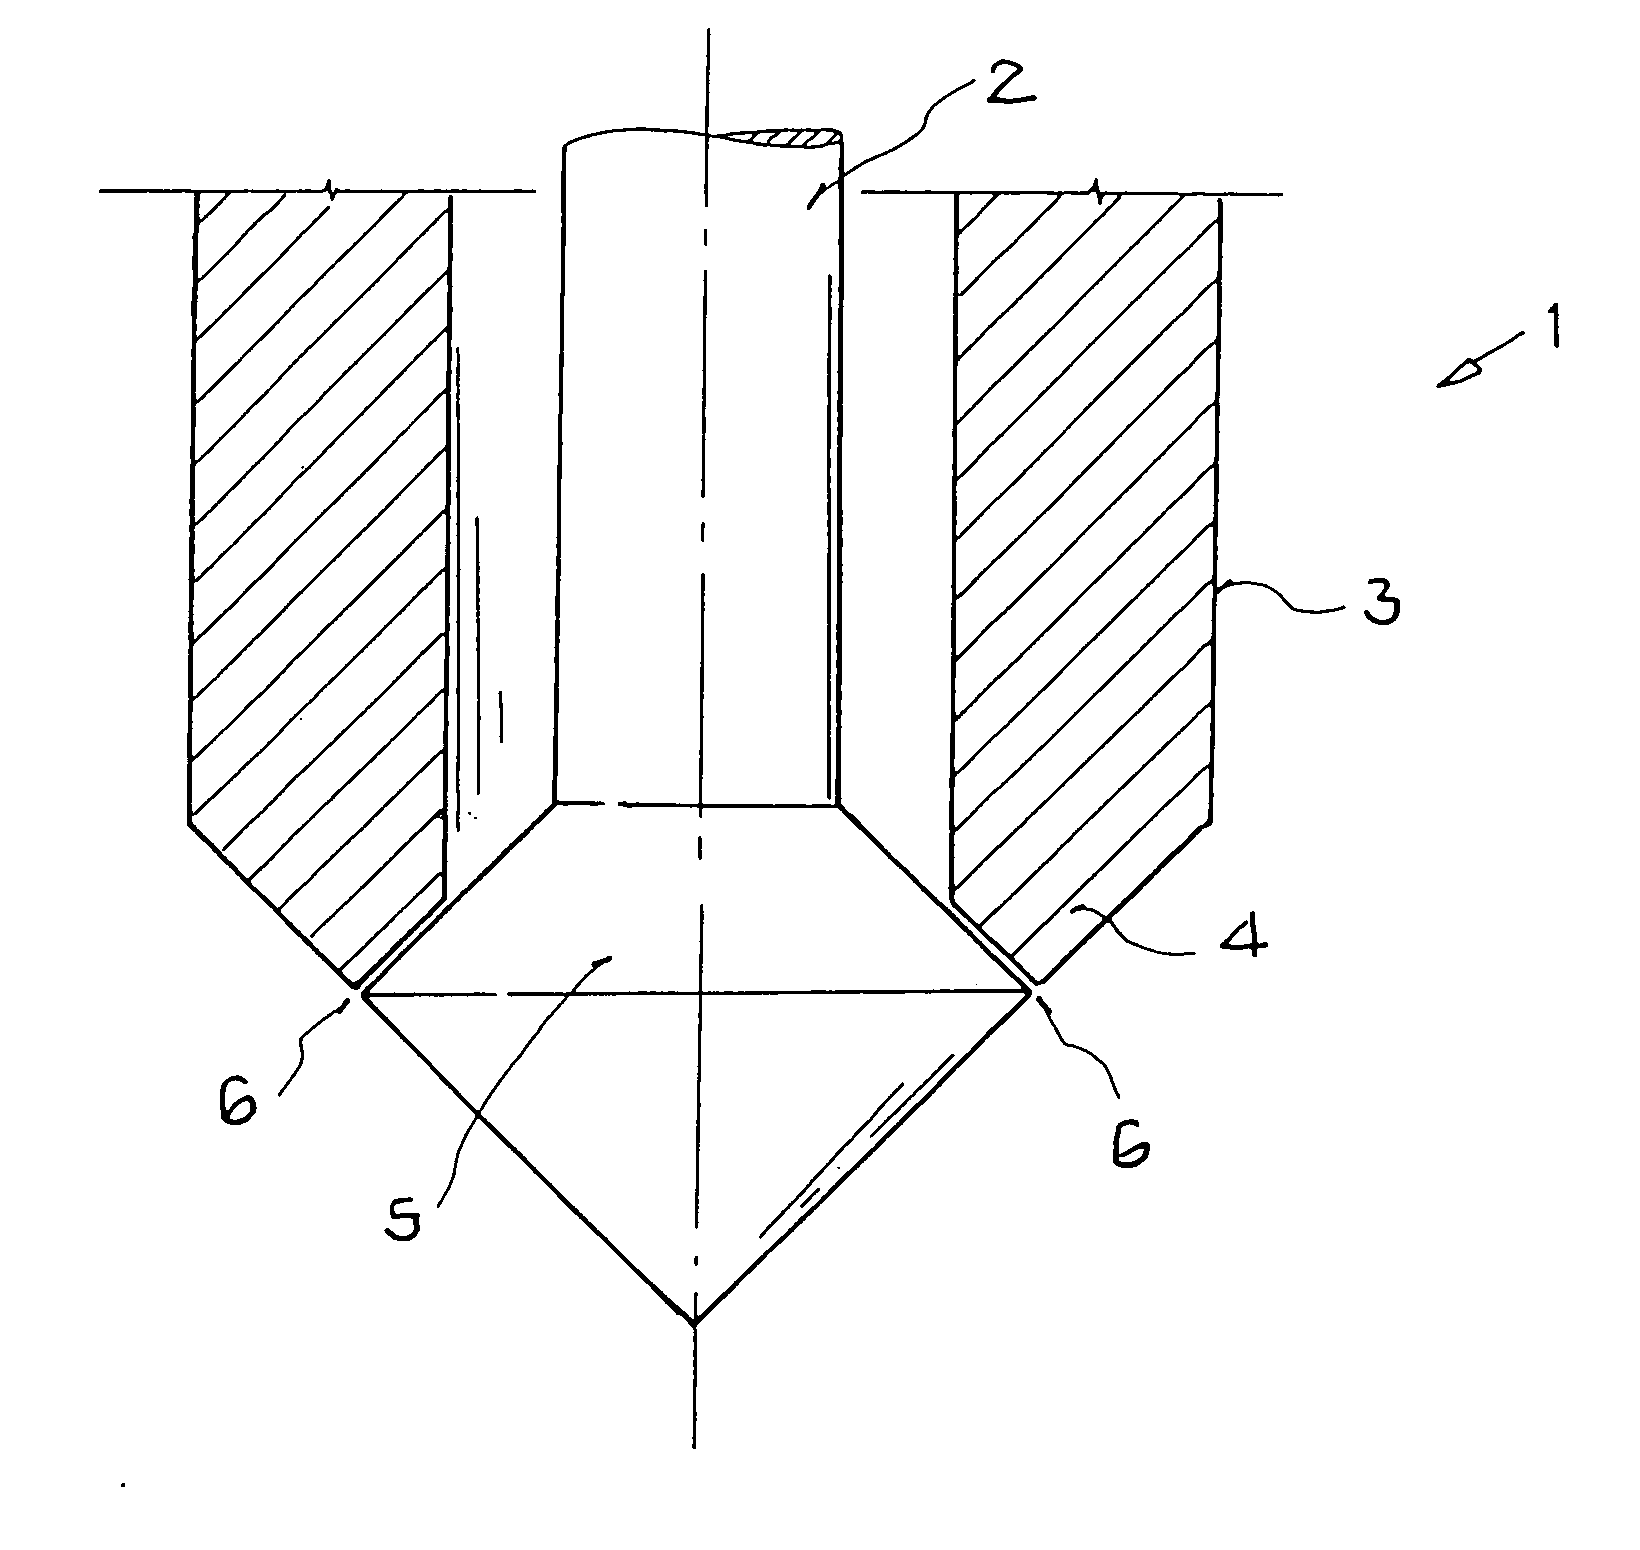 Fuel injection nozzle for an internal combustion engine with direct fuel injection